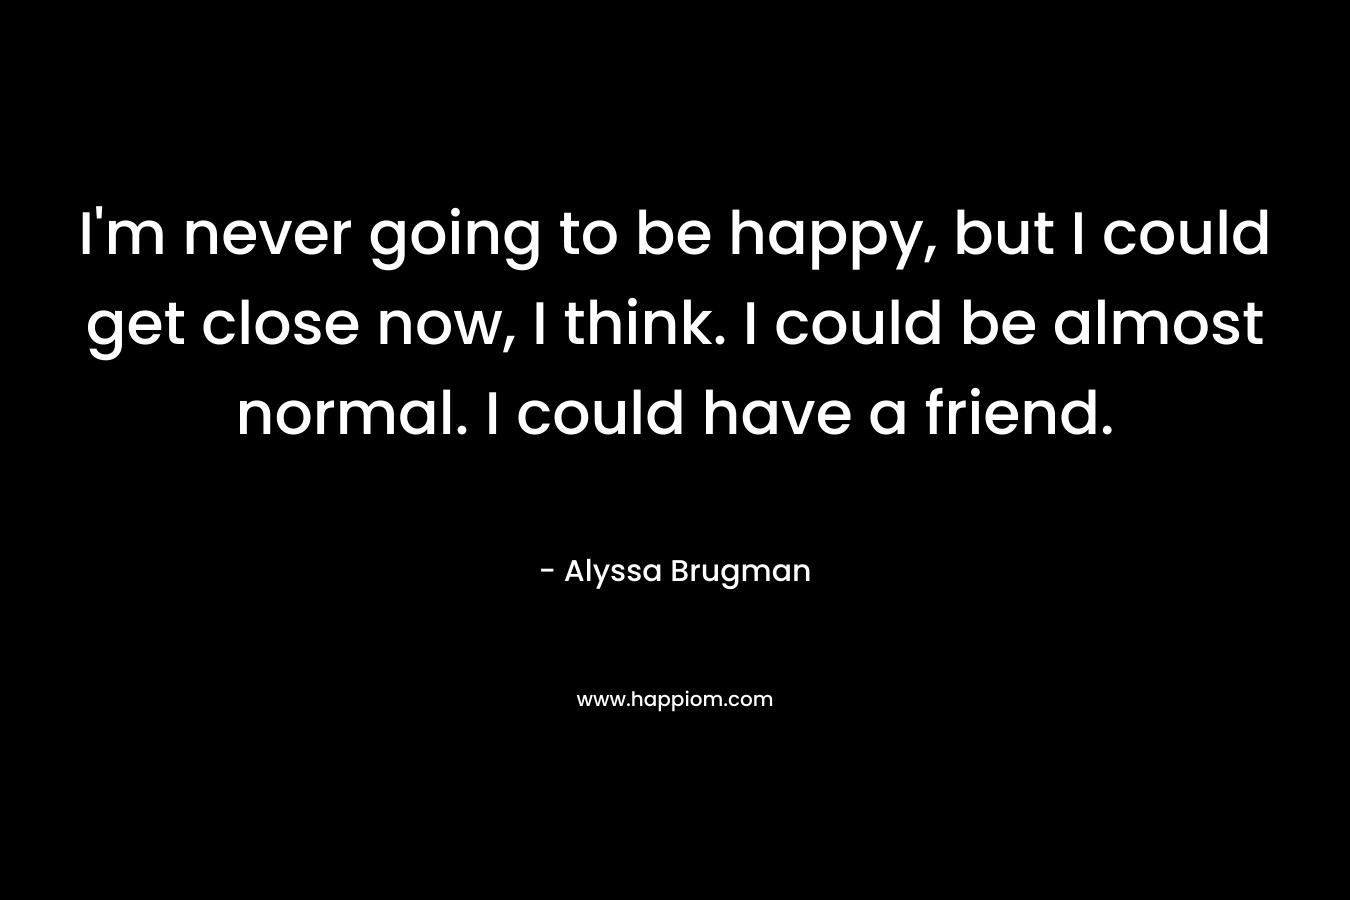 I’m never going to be happy, but I could get close now, I think. I could be almost normal. I could have a friend. – Alyssa Brugman